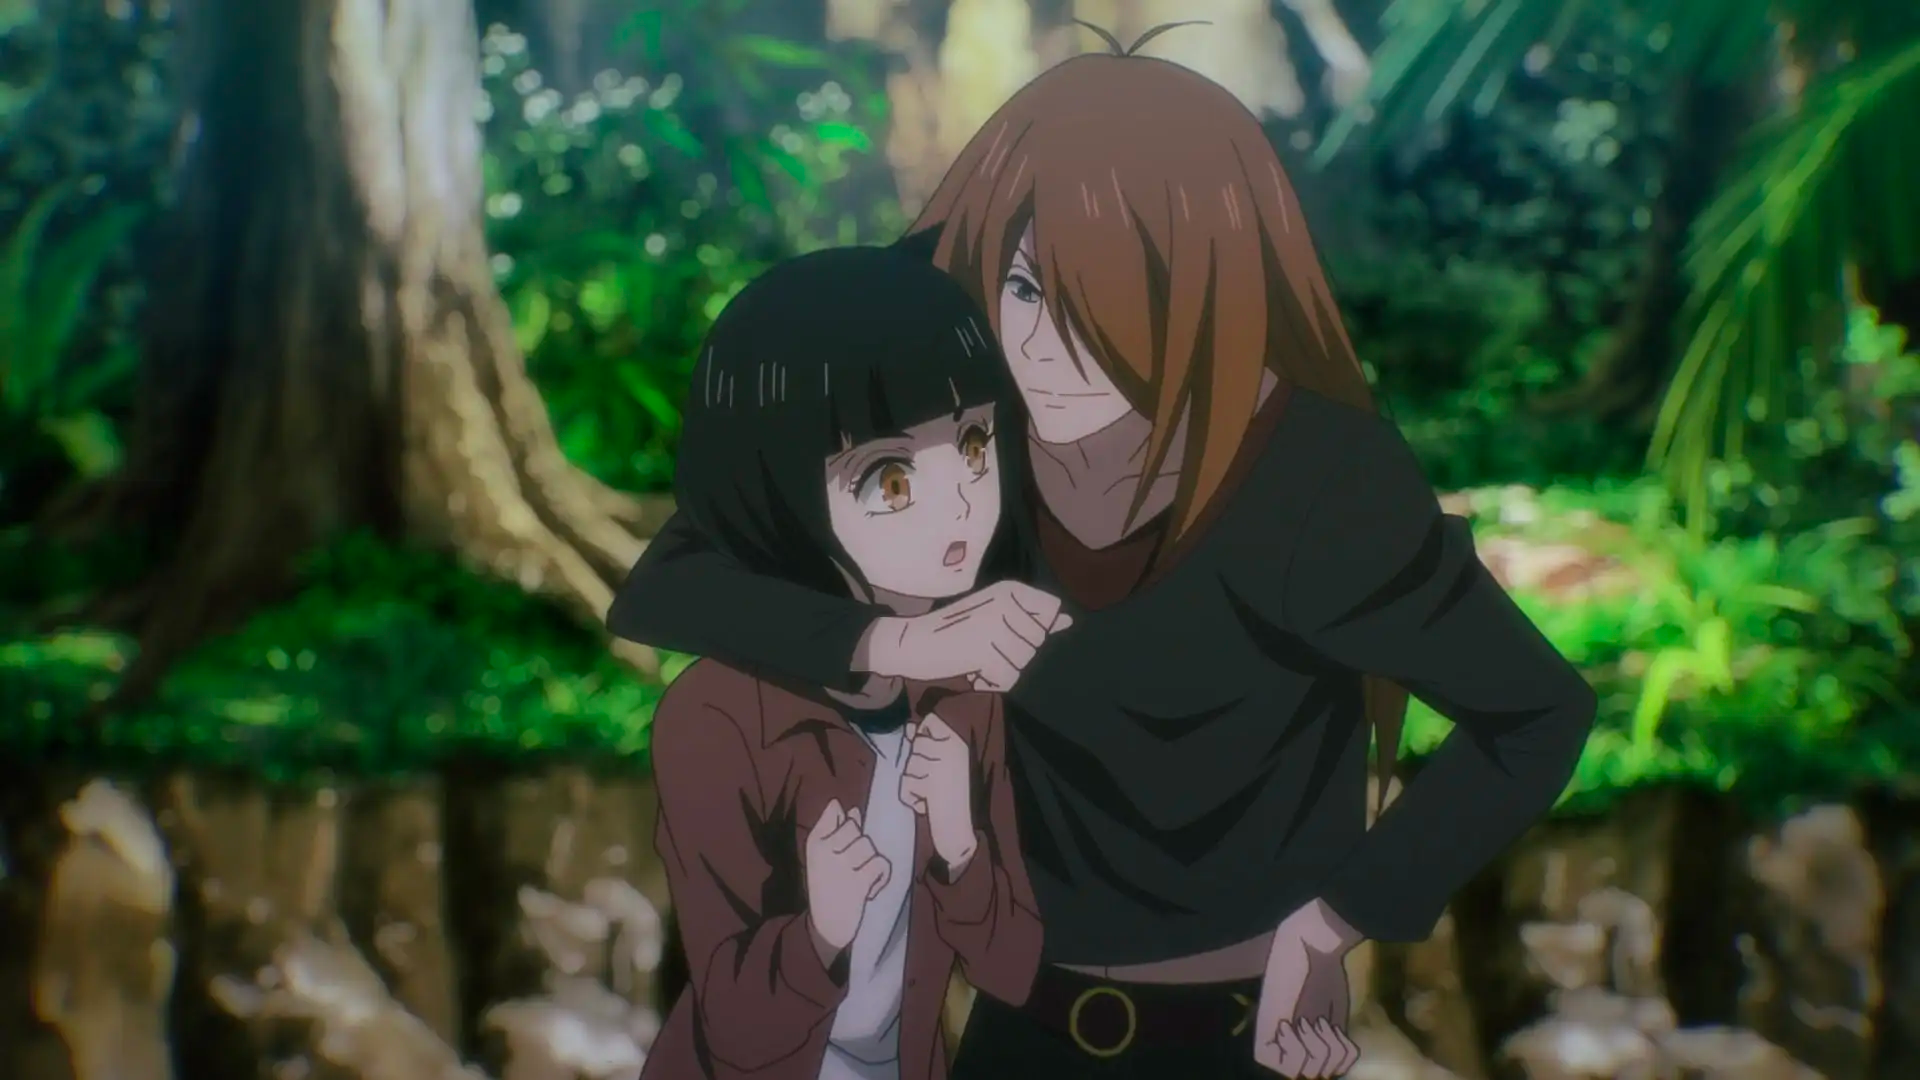 A character in 7 seeds wraps his arm around the neck of another character, as she looks shocked.